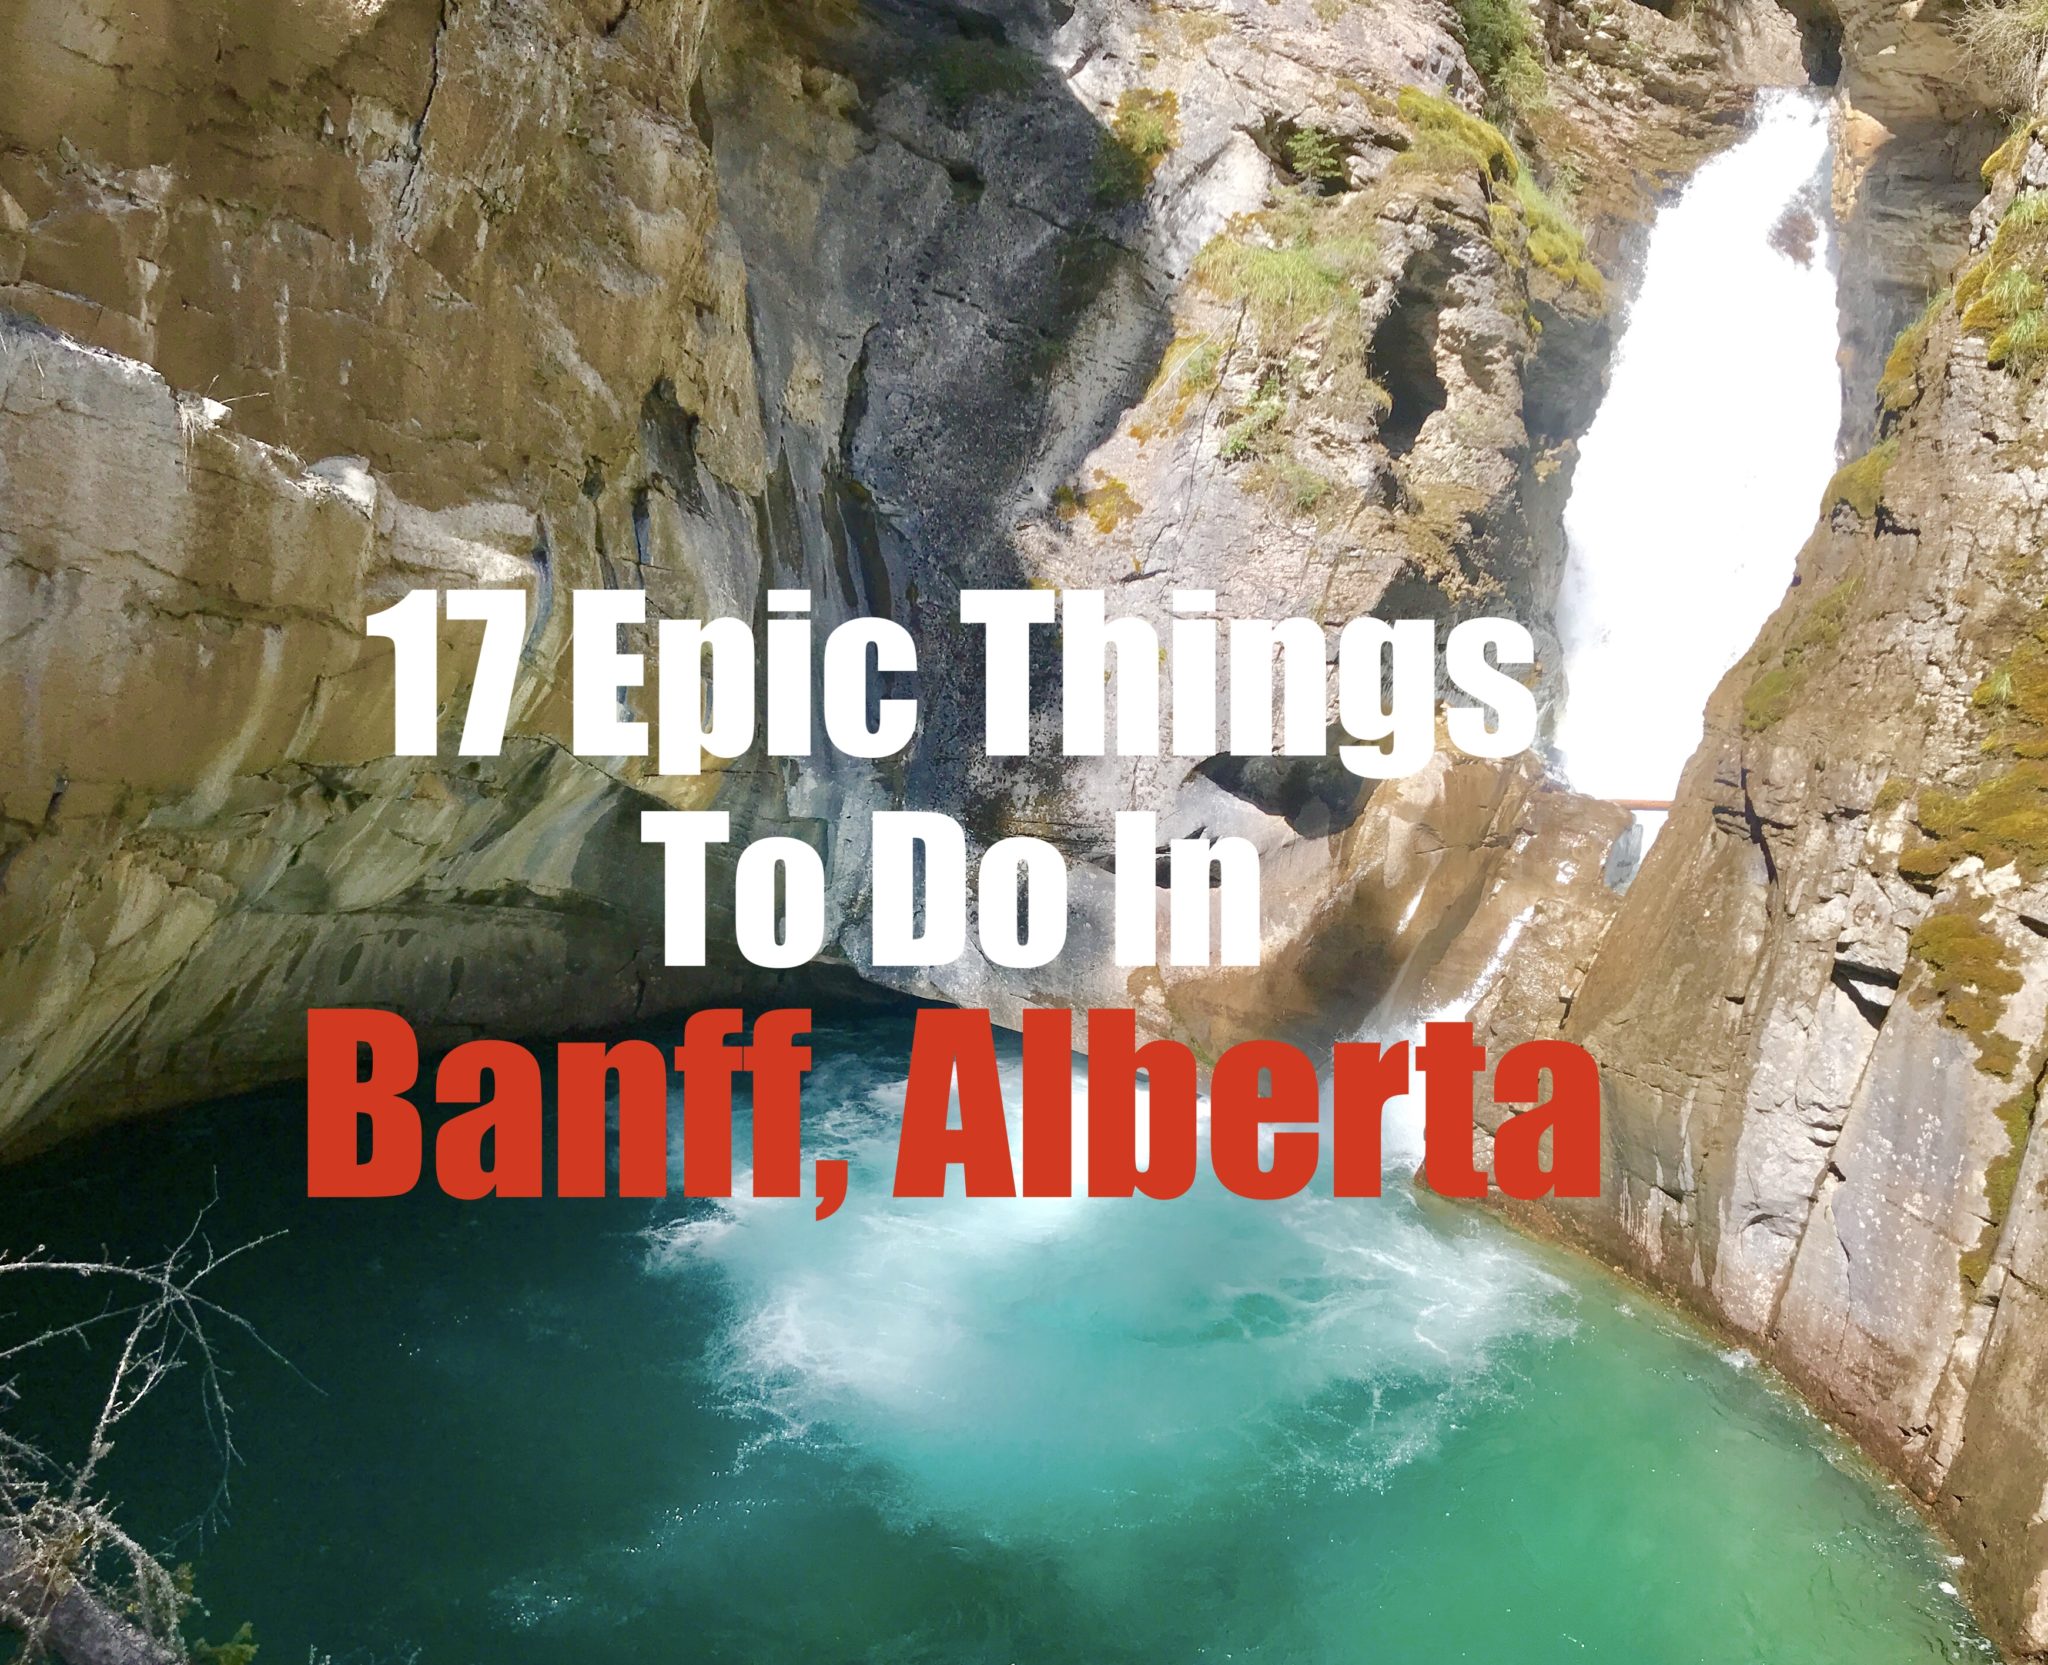 17 Epic things to do in Banff, Alberta